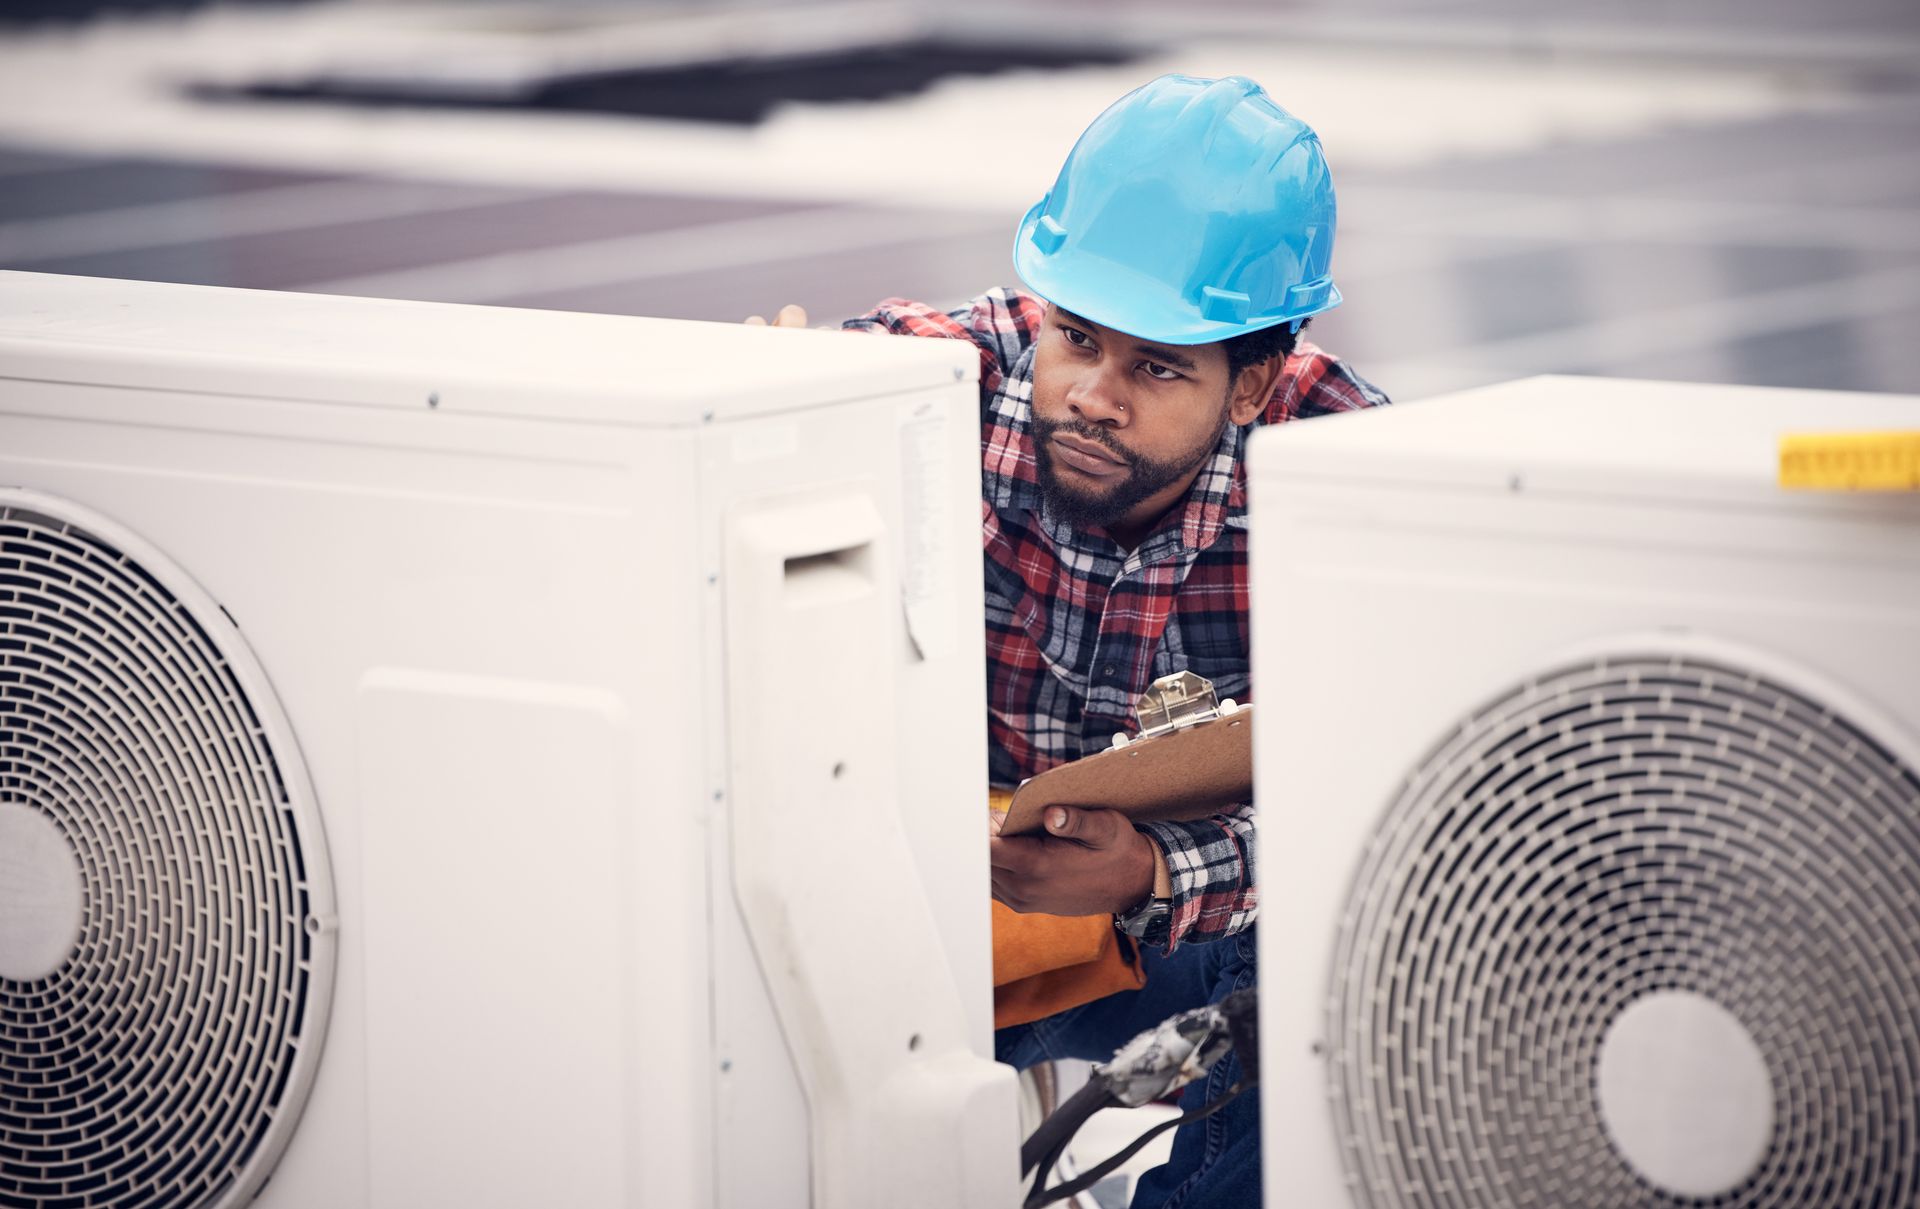 System Maintenance: Now is the Perfect Time for This Important Heating Service